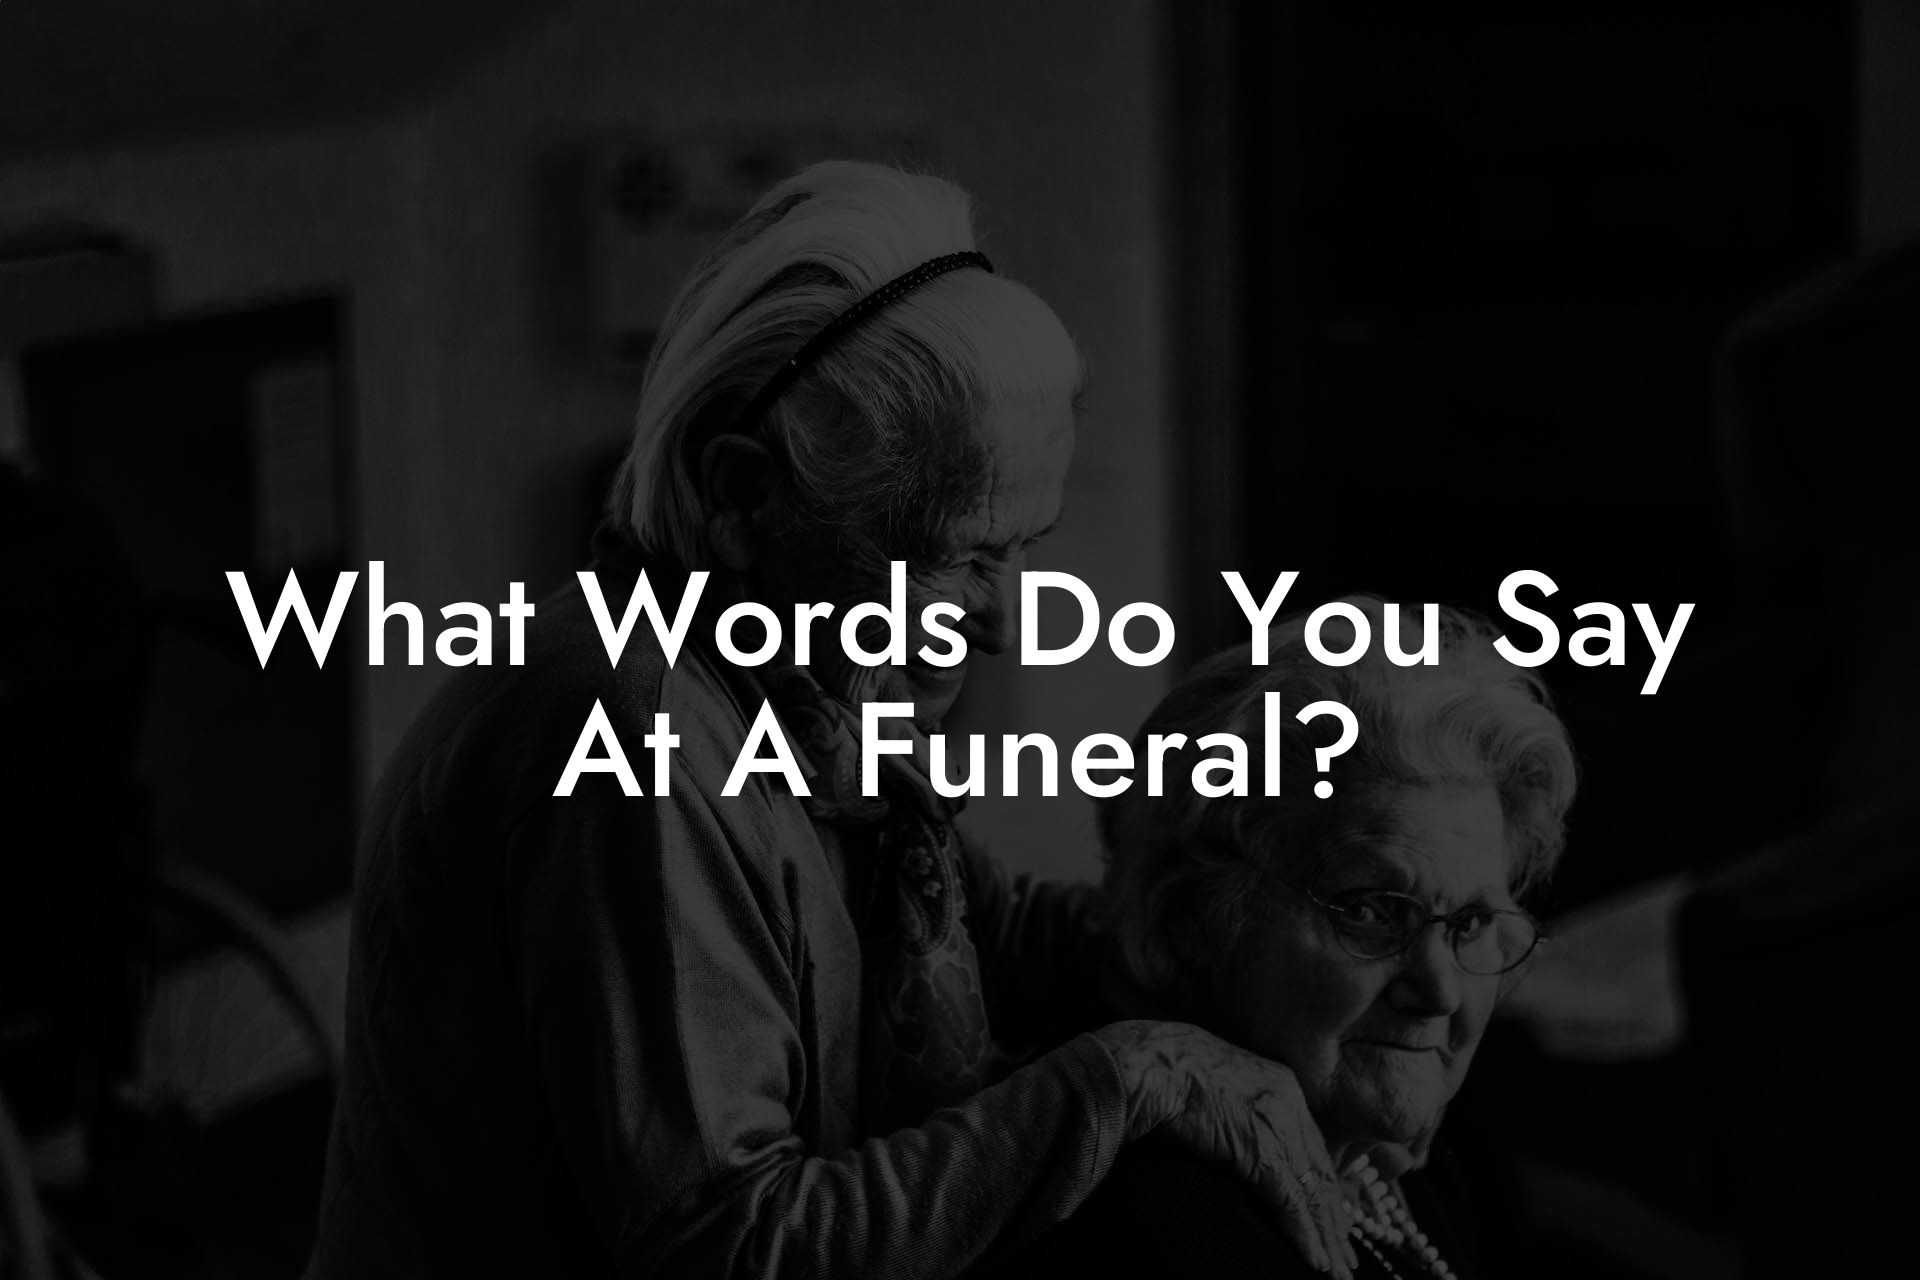 What Words Do You Say At A Funeral?